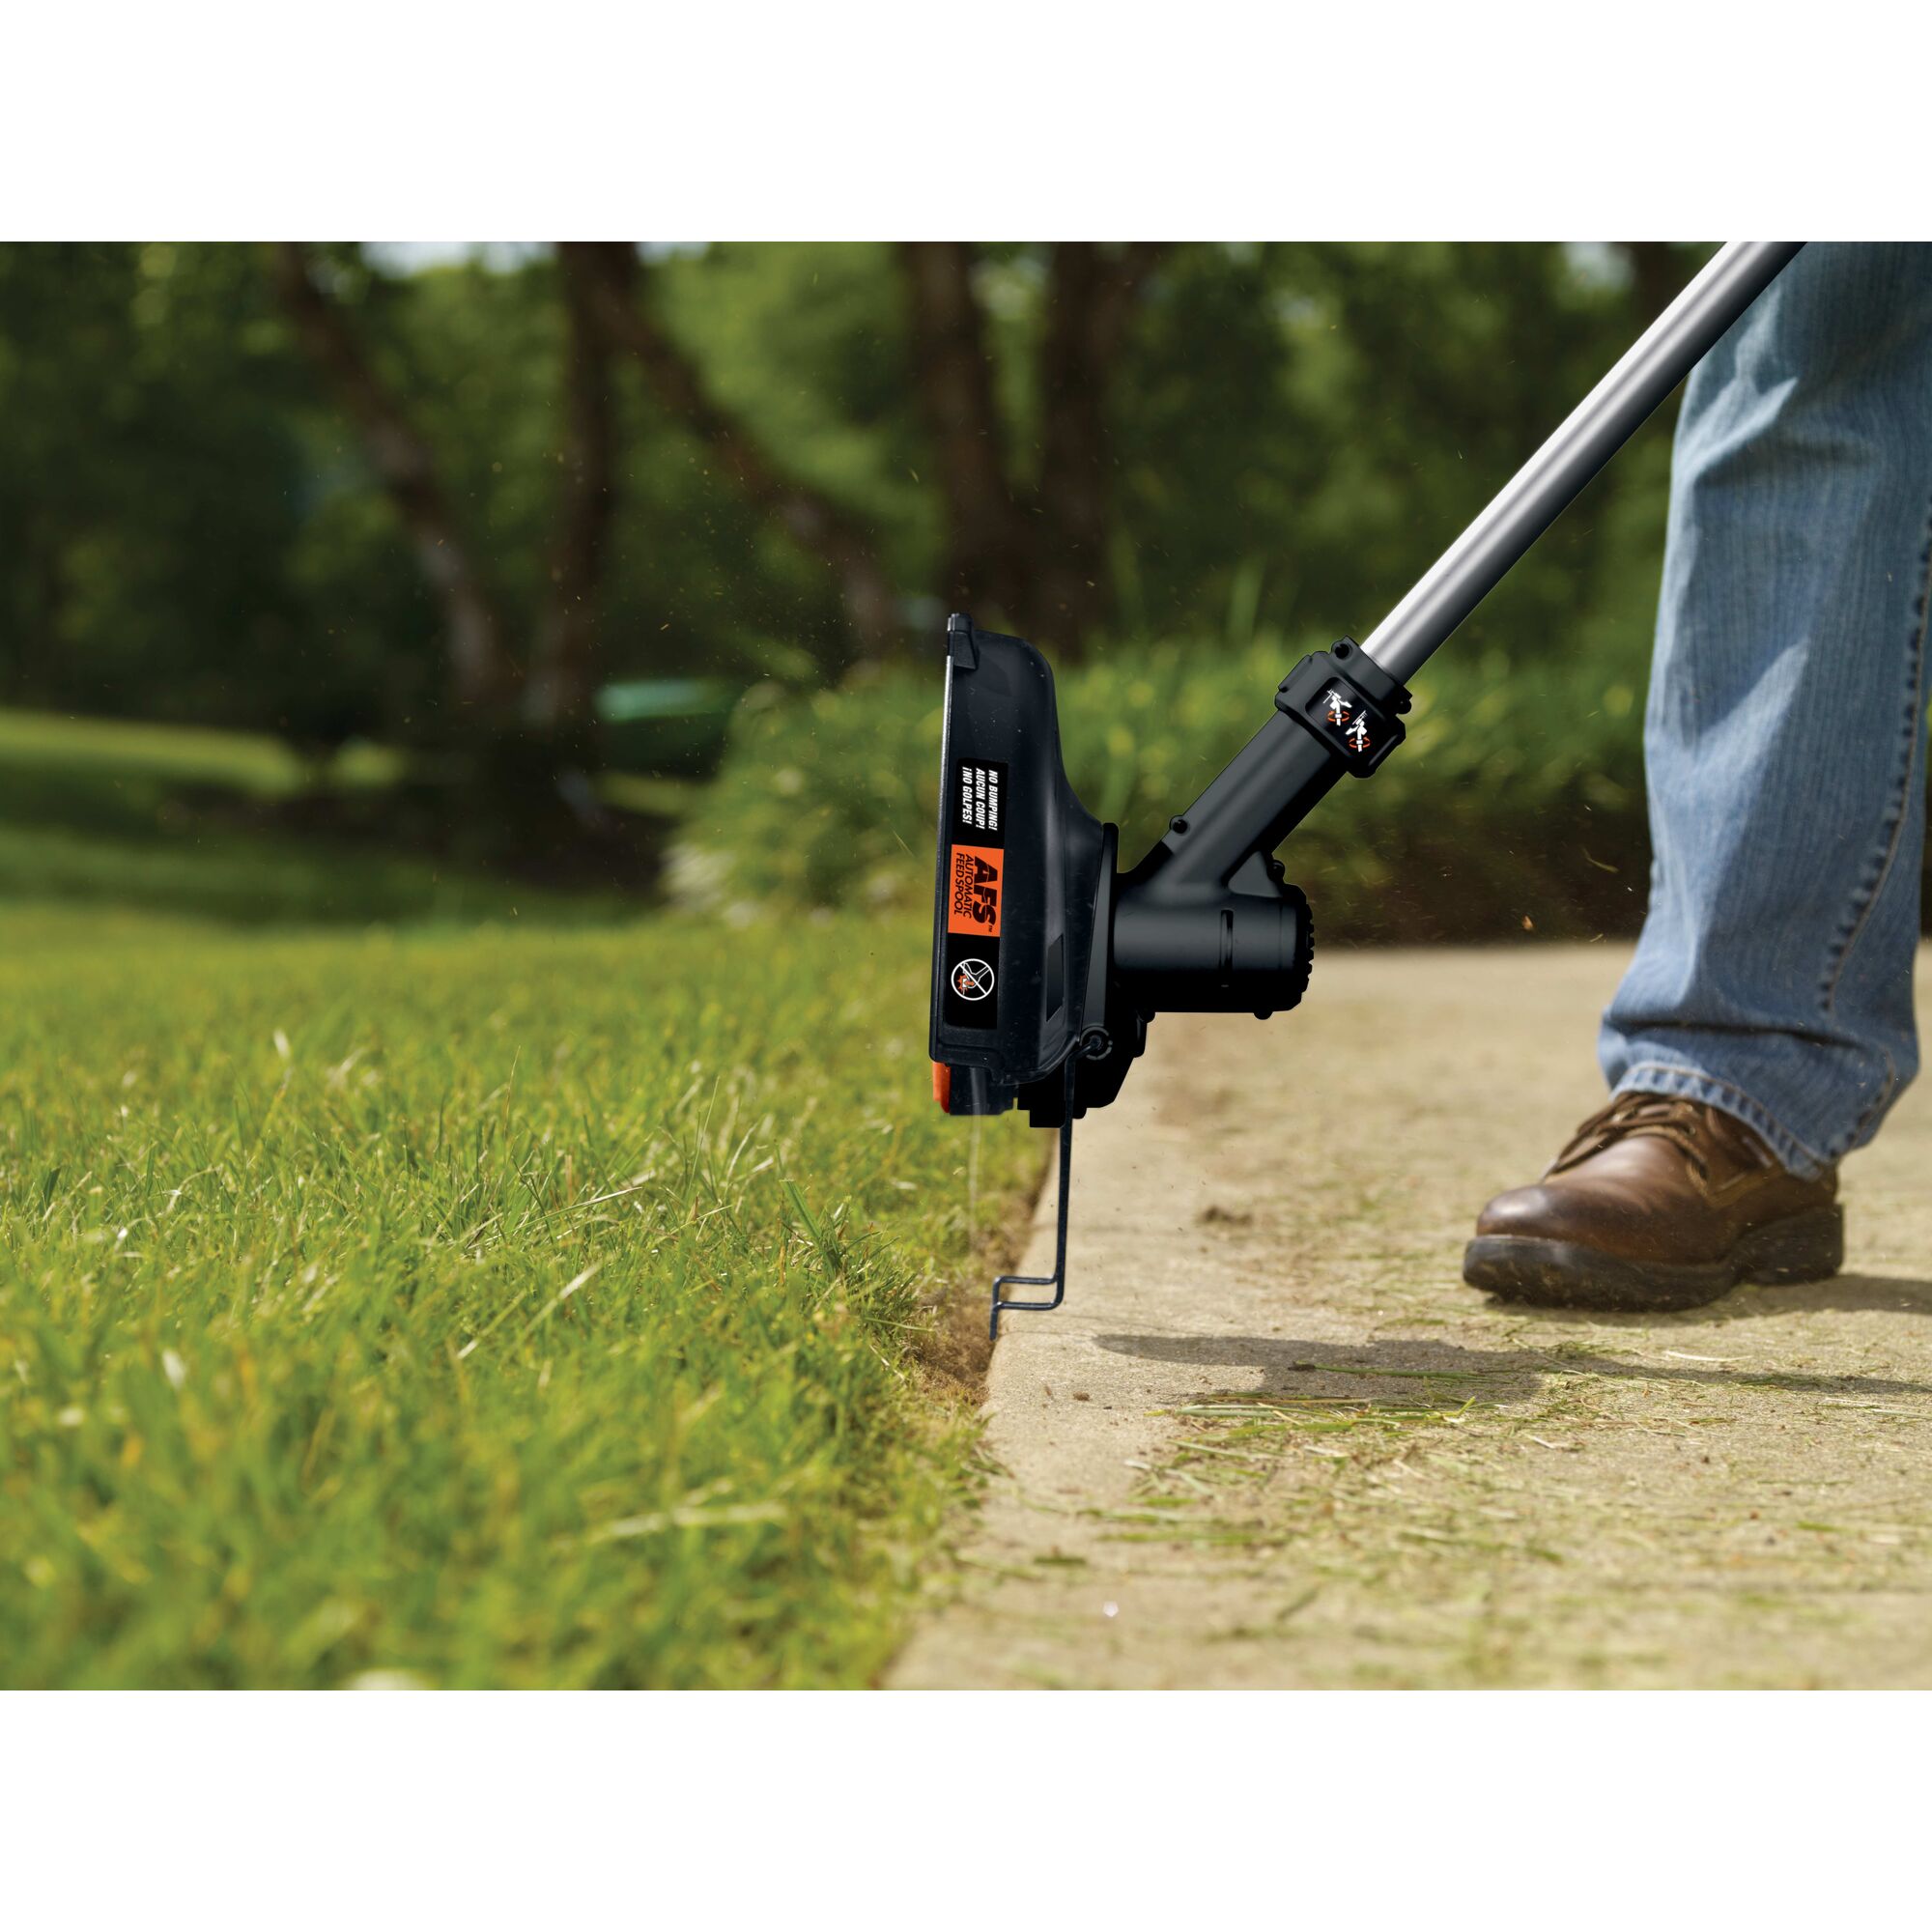 40 Volt Max String Trimmer being used to edge near a sidewalk.